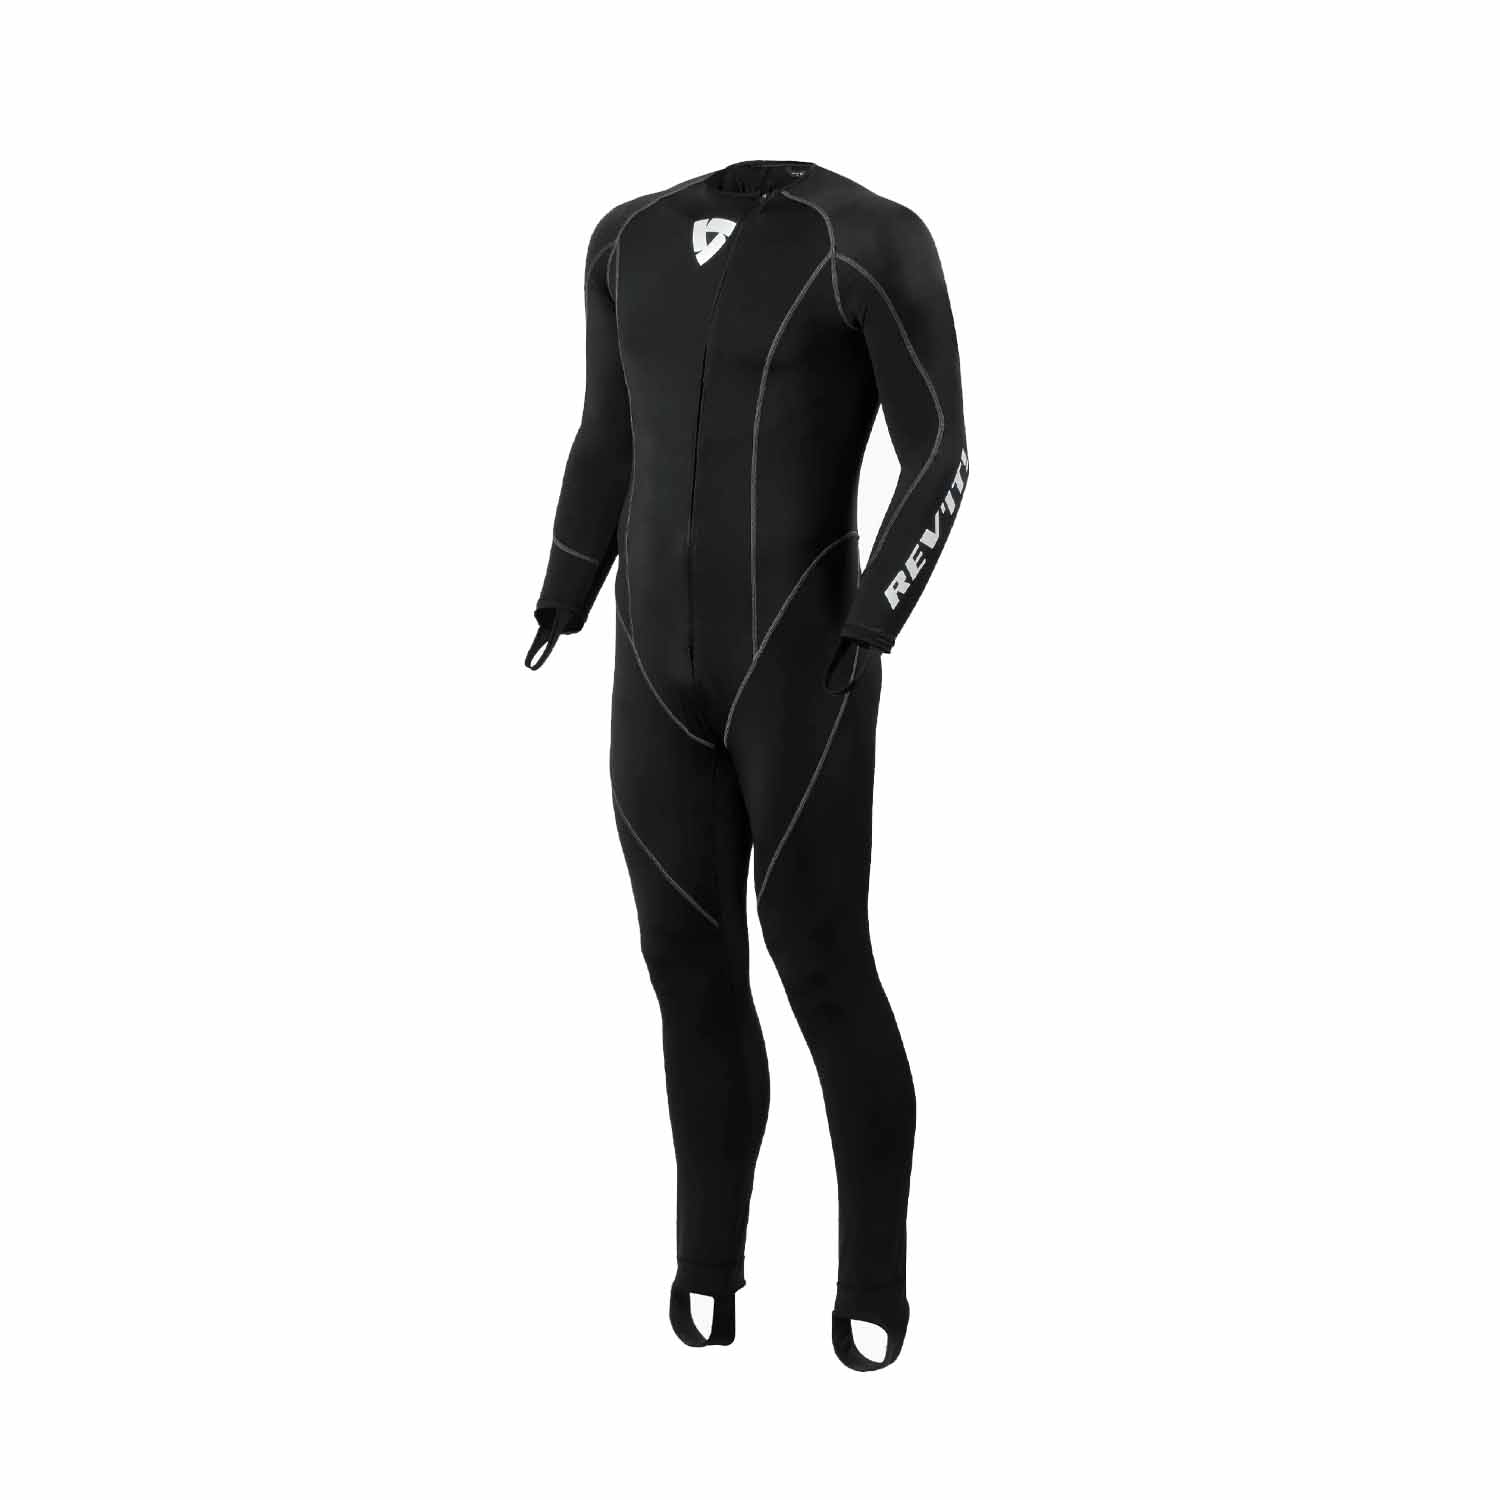 Image of REV'IT! Excellerator 2 Undersuit Black Taille S